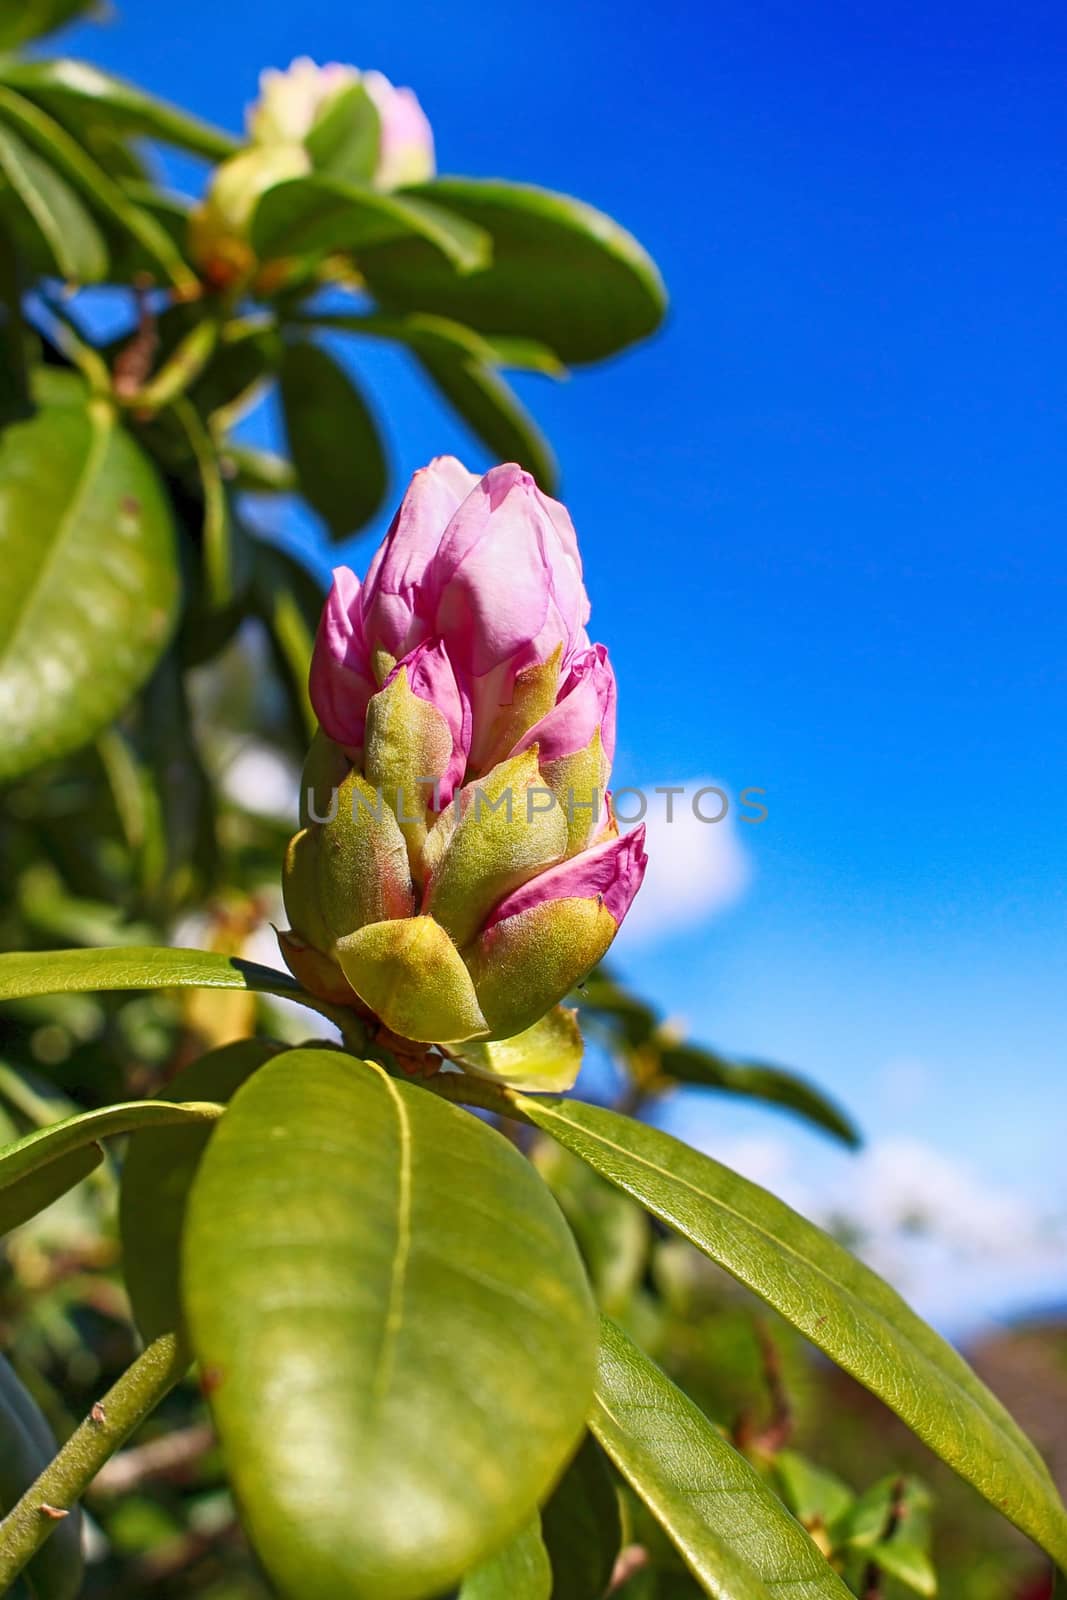 Magnolia Bud by ziss